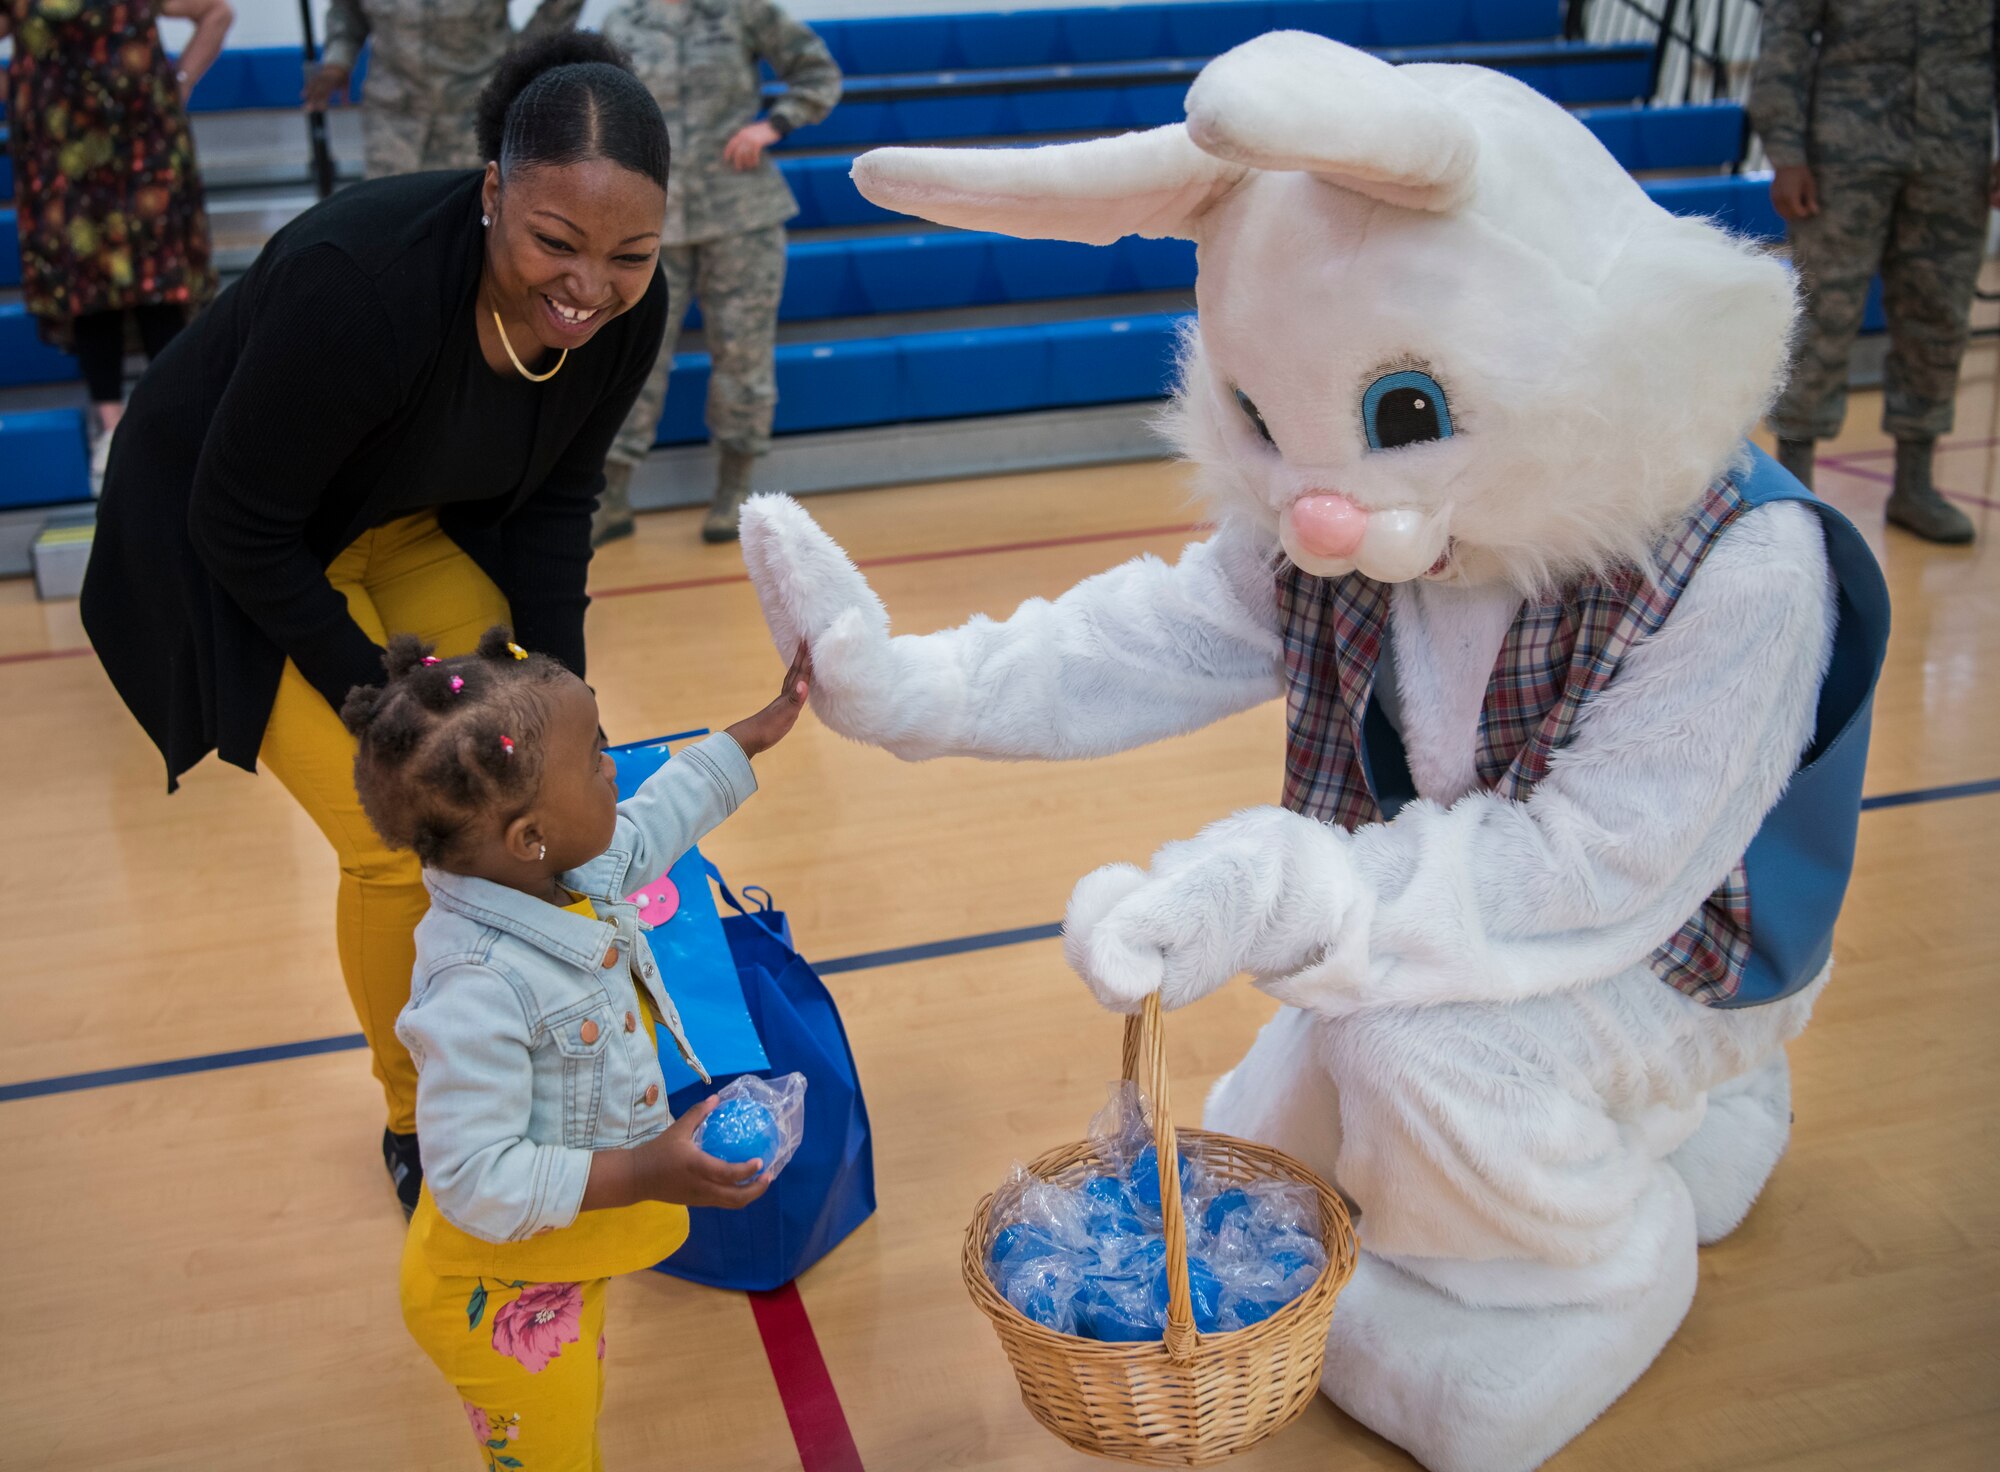 Mariah Corbin high-fives the Easter Bunny the Family Advocacy Program’s Play Group Easter Egg Hunt held in recognition of National Child Abuse Prevention Month on April 17, 2019, at Dover Air Force Base, Del. The Family Advocacy Program’s victim advocates provide service management, counseling, support, safety planning and follow-up services to survivors of domestic violence and their families. (U.S. Air Force photo by Senior Airman Christopher Quail)